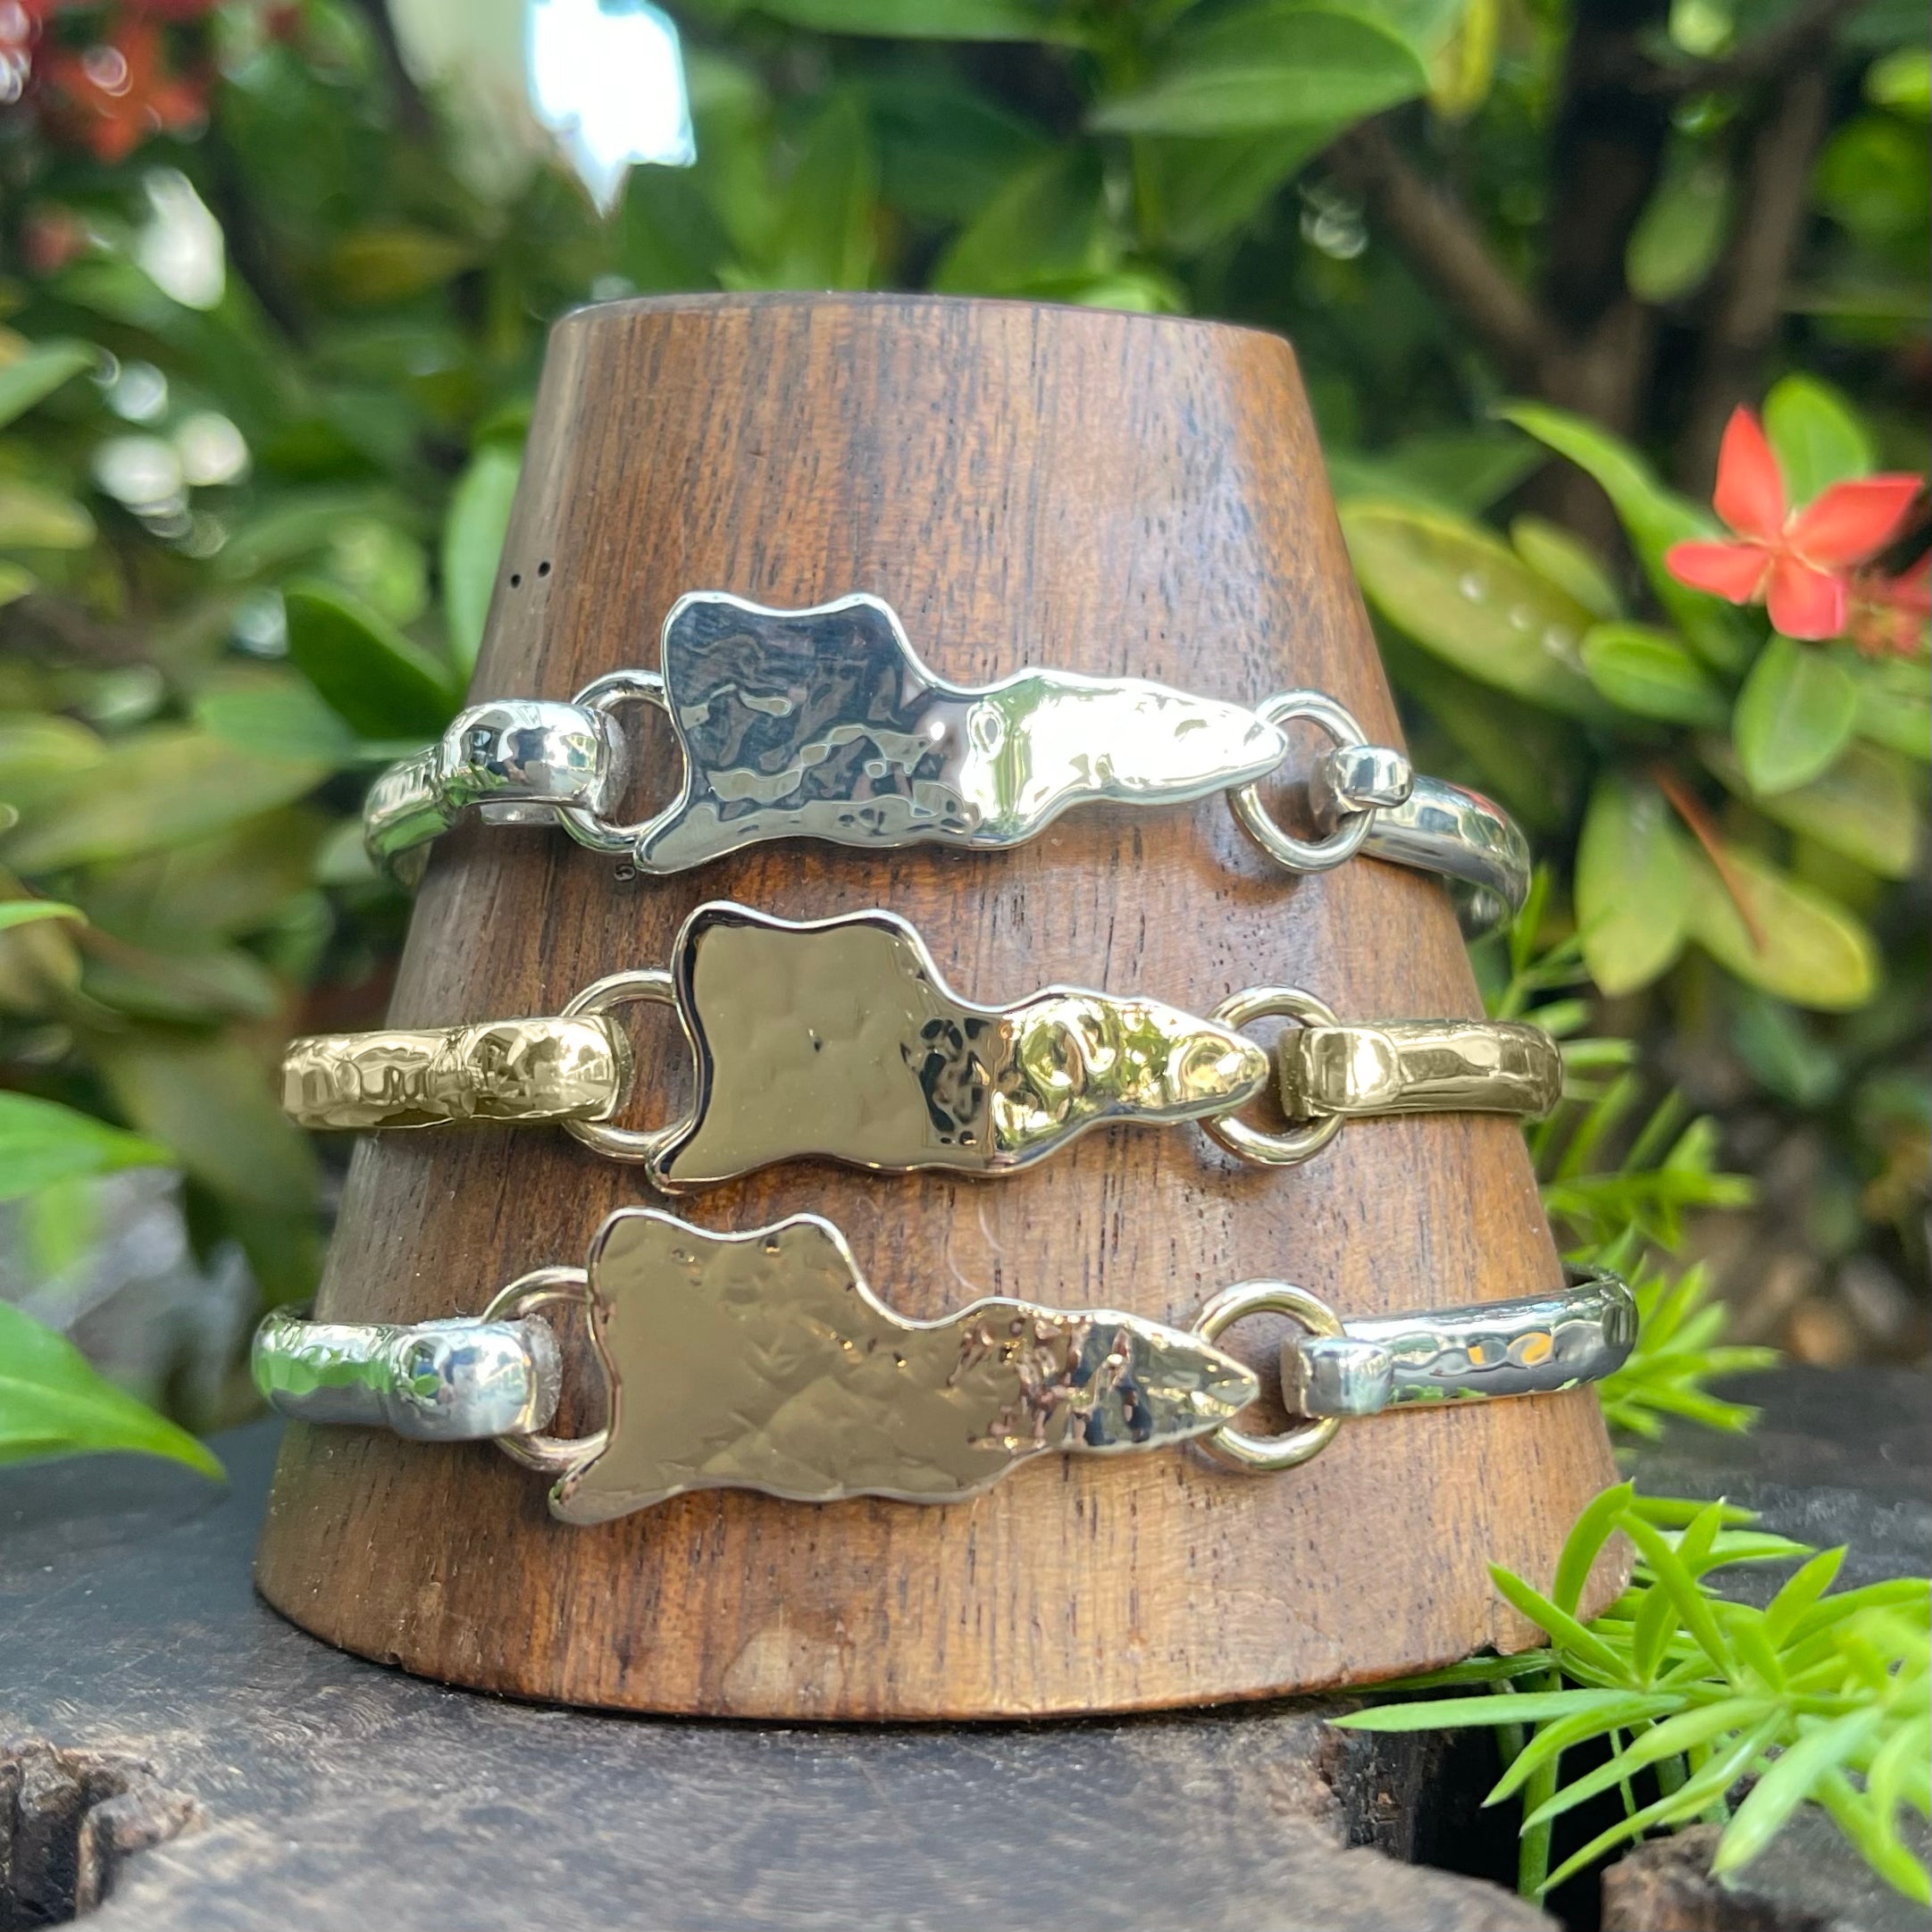 St Croix's beautiful bracelets by IB Designs, Crucian Gold, and Sonya's  discovered by Travelocity.